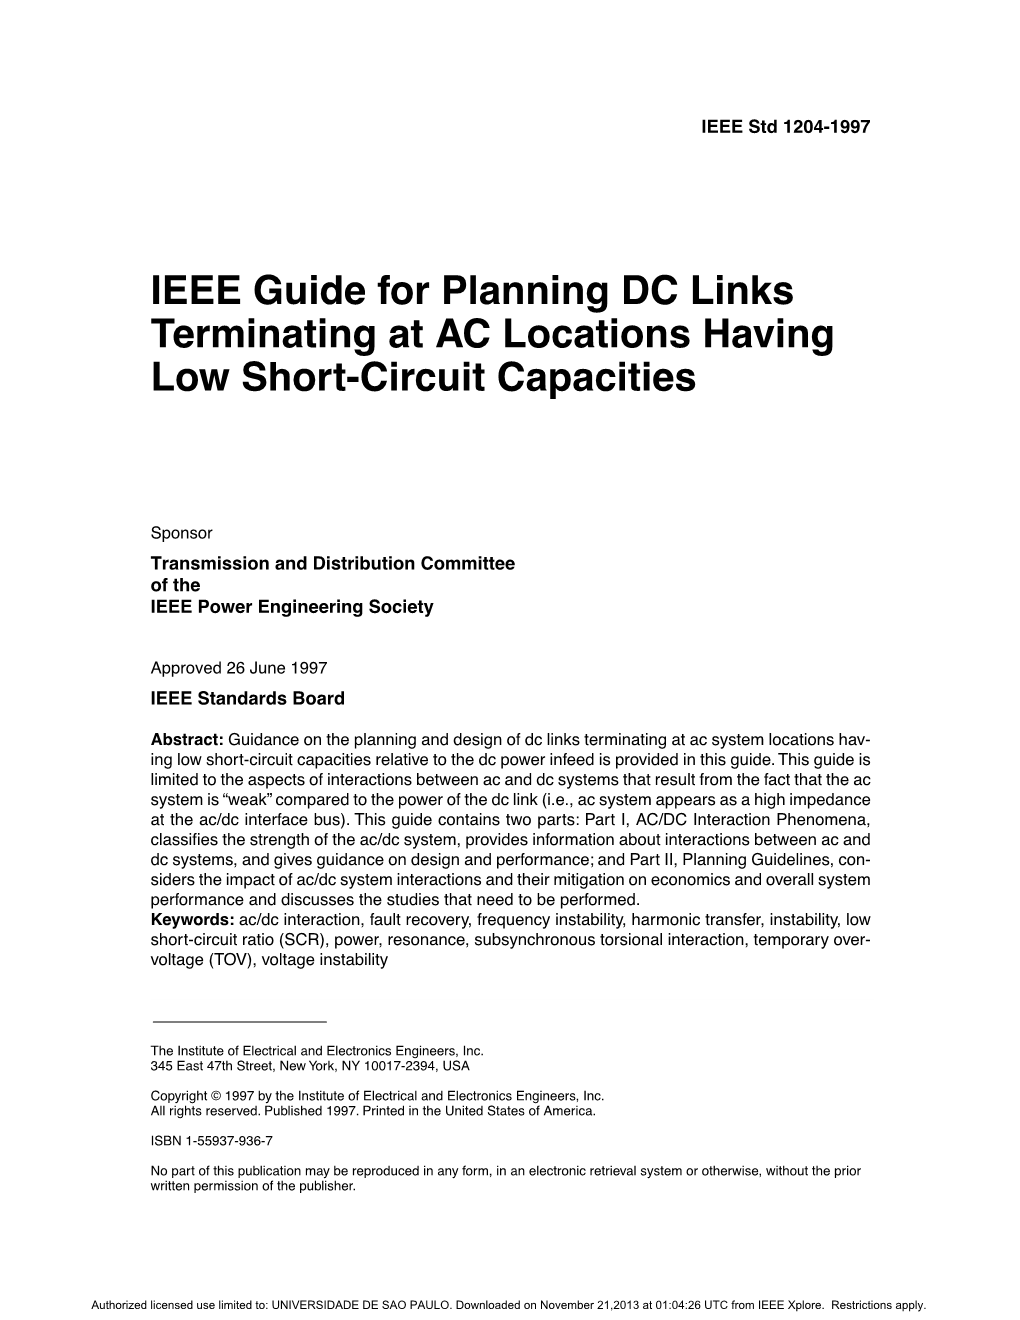 IEEE Guide for Planning DC Links Terminating at AC Locations Having Low Short-Circuit Capacities